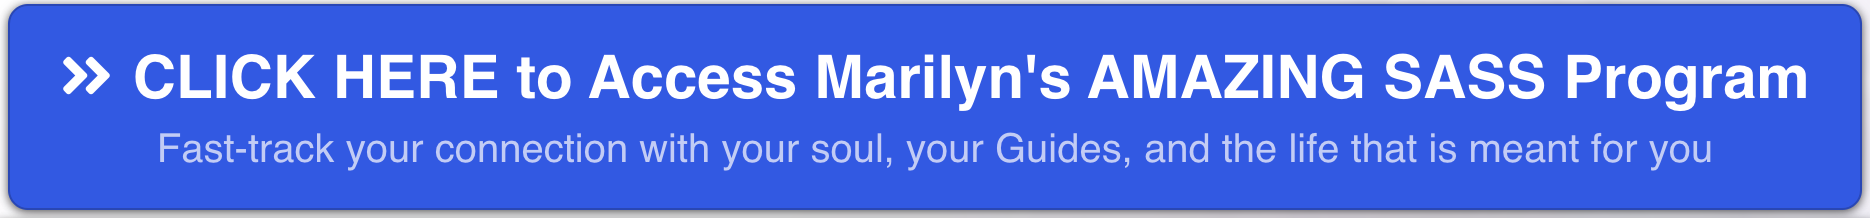 marilyn offer button